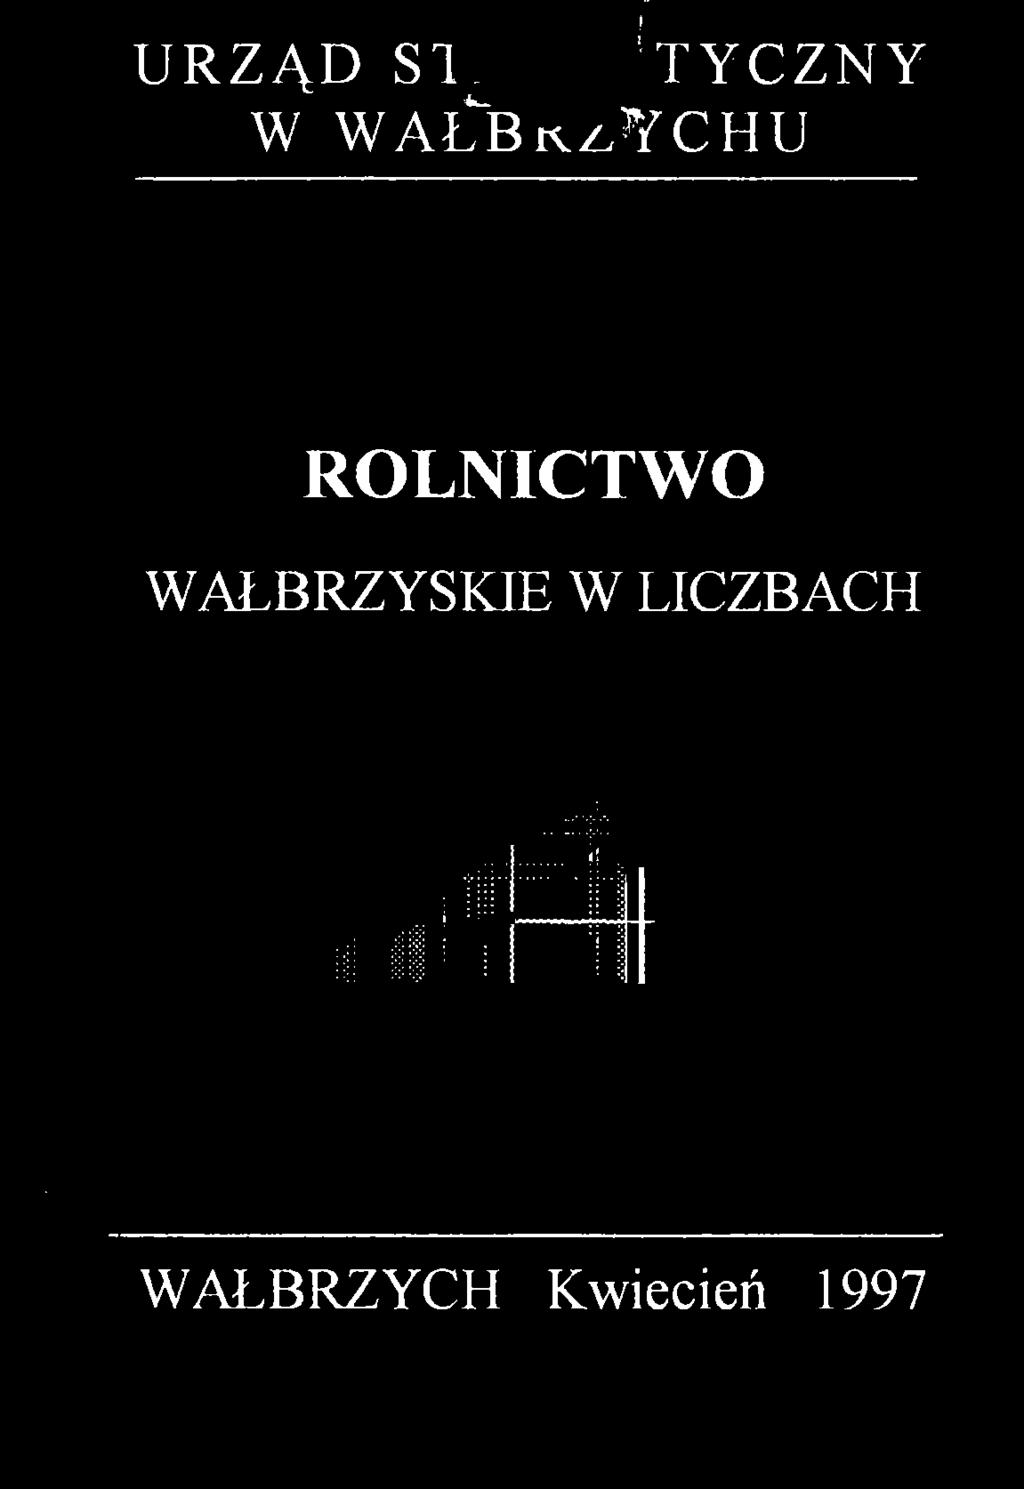 ROLNICTWO